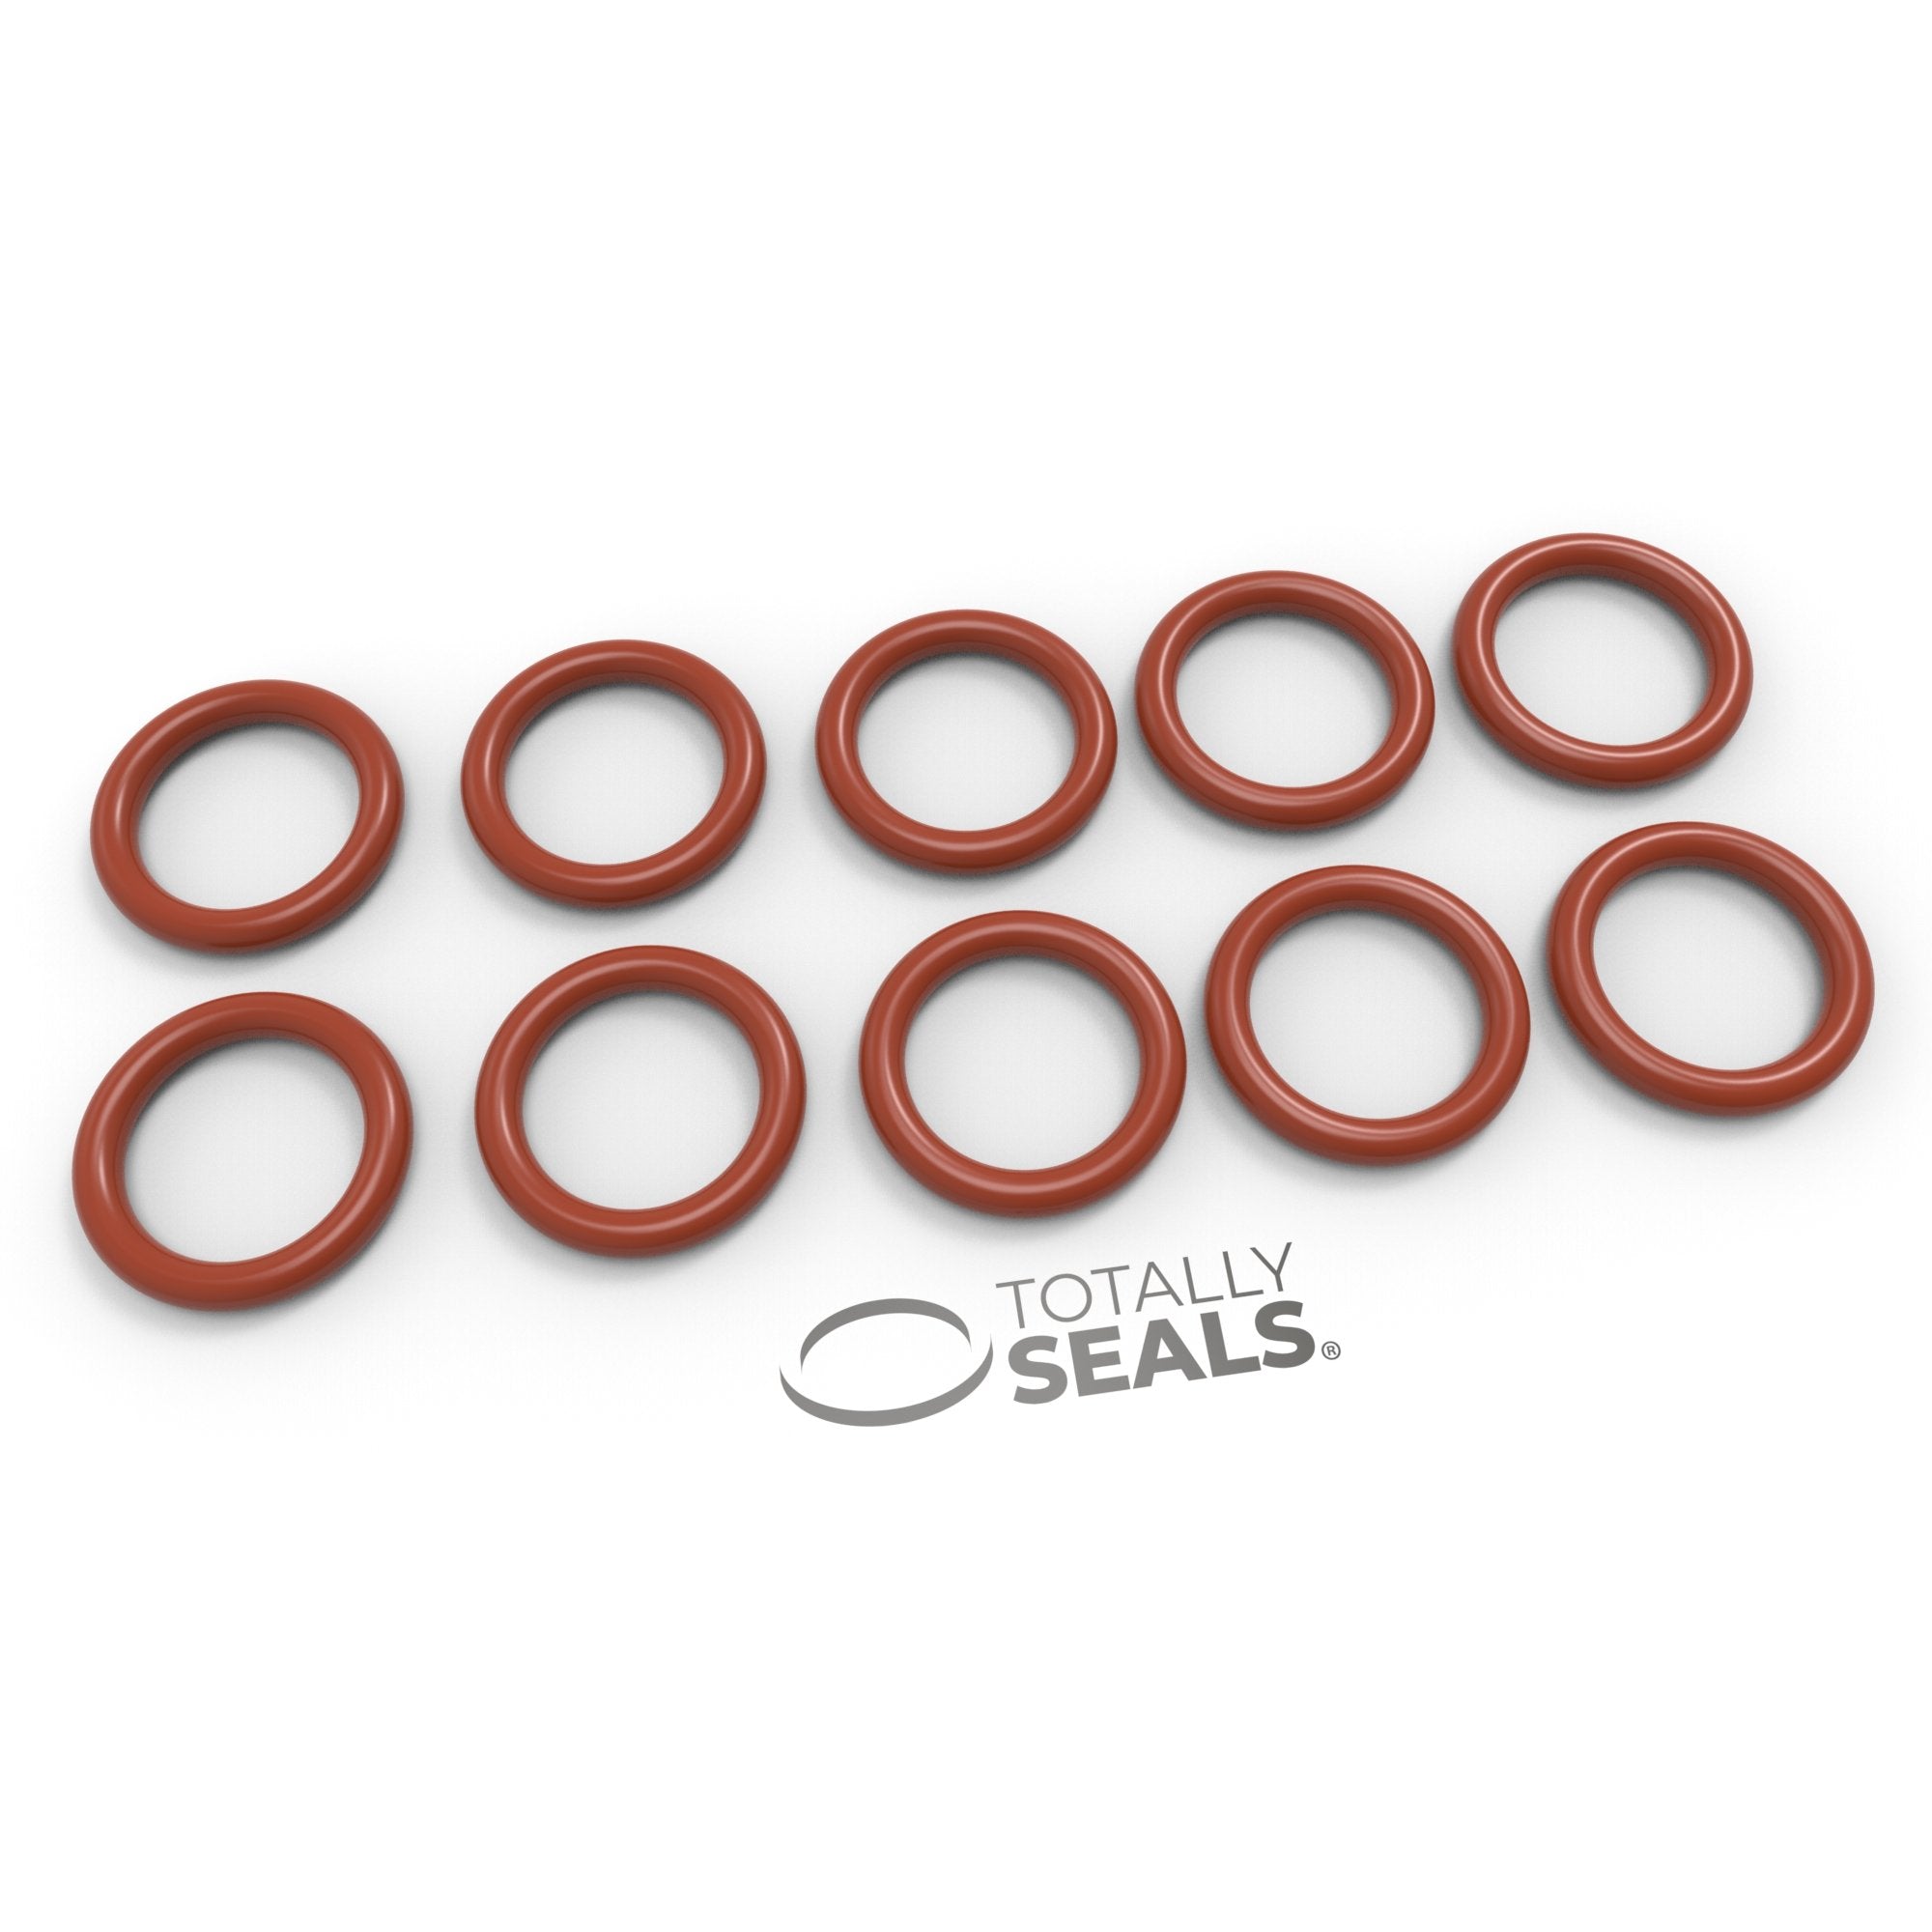 Uxcell 10x Red Rubber 12mm x 2mm x 8mm Oil Seal O Rings Gaskets Washers :  Amazon.in: Home Improvement